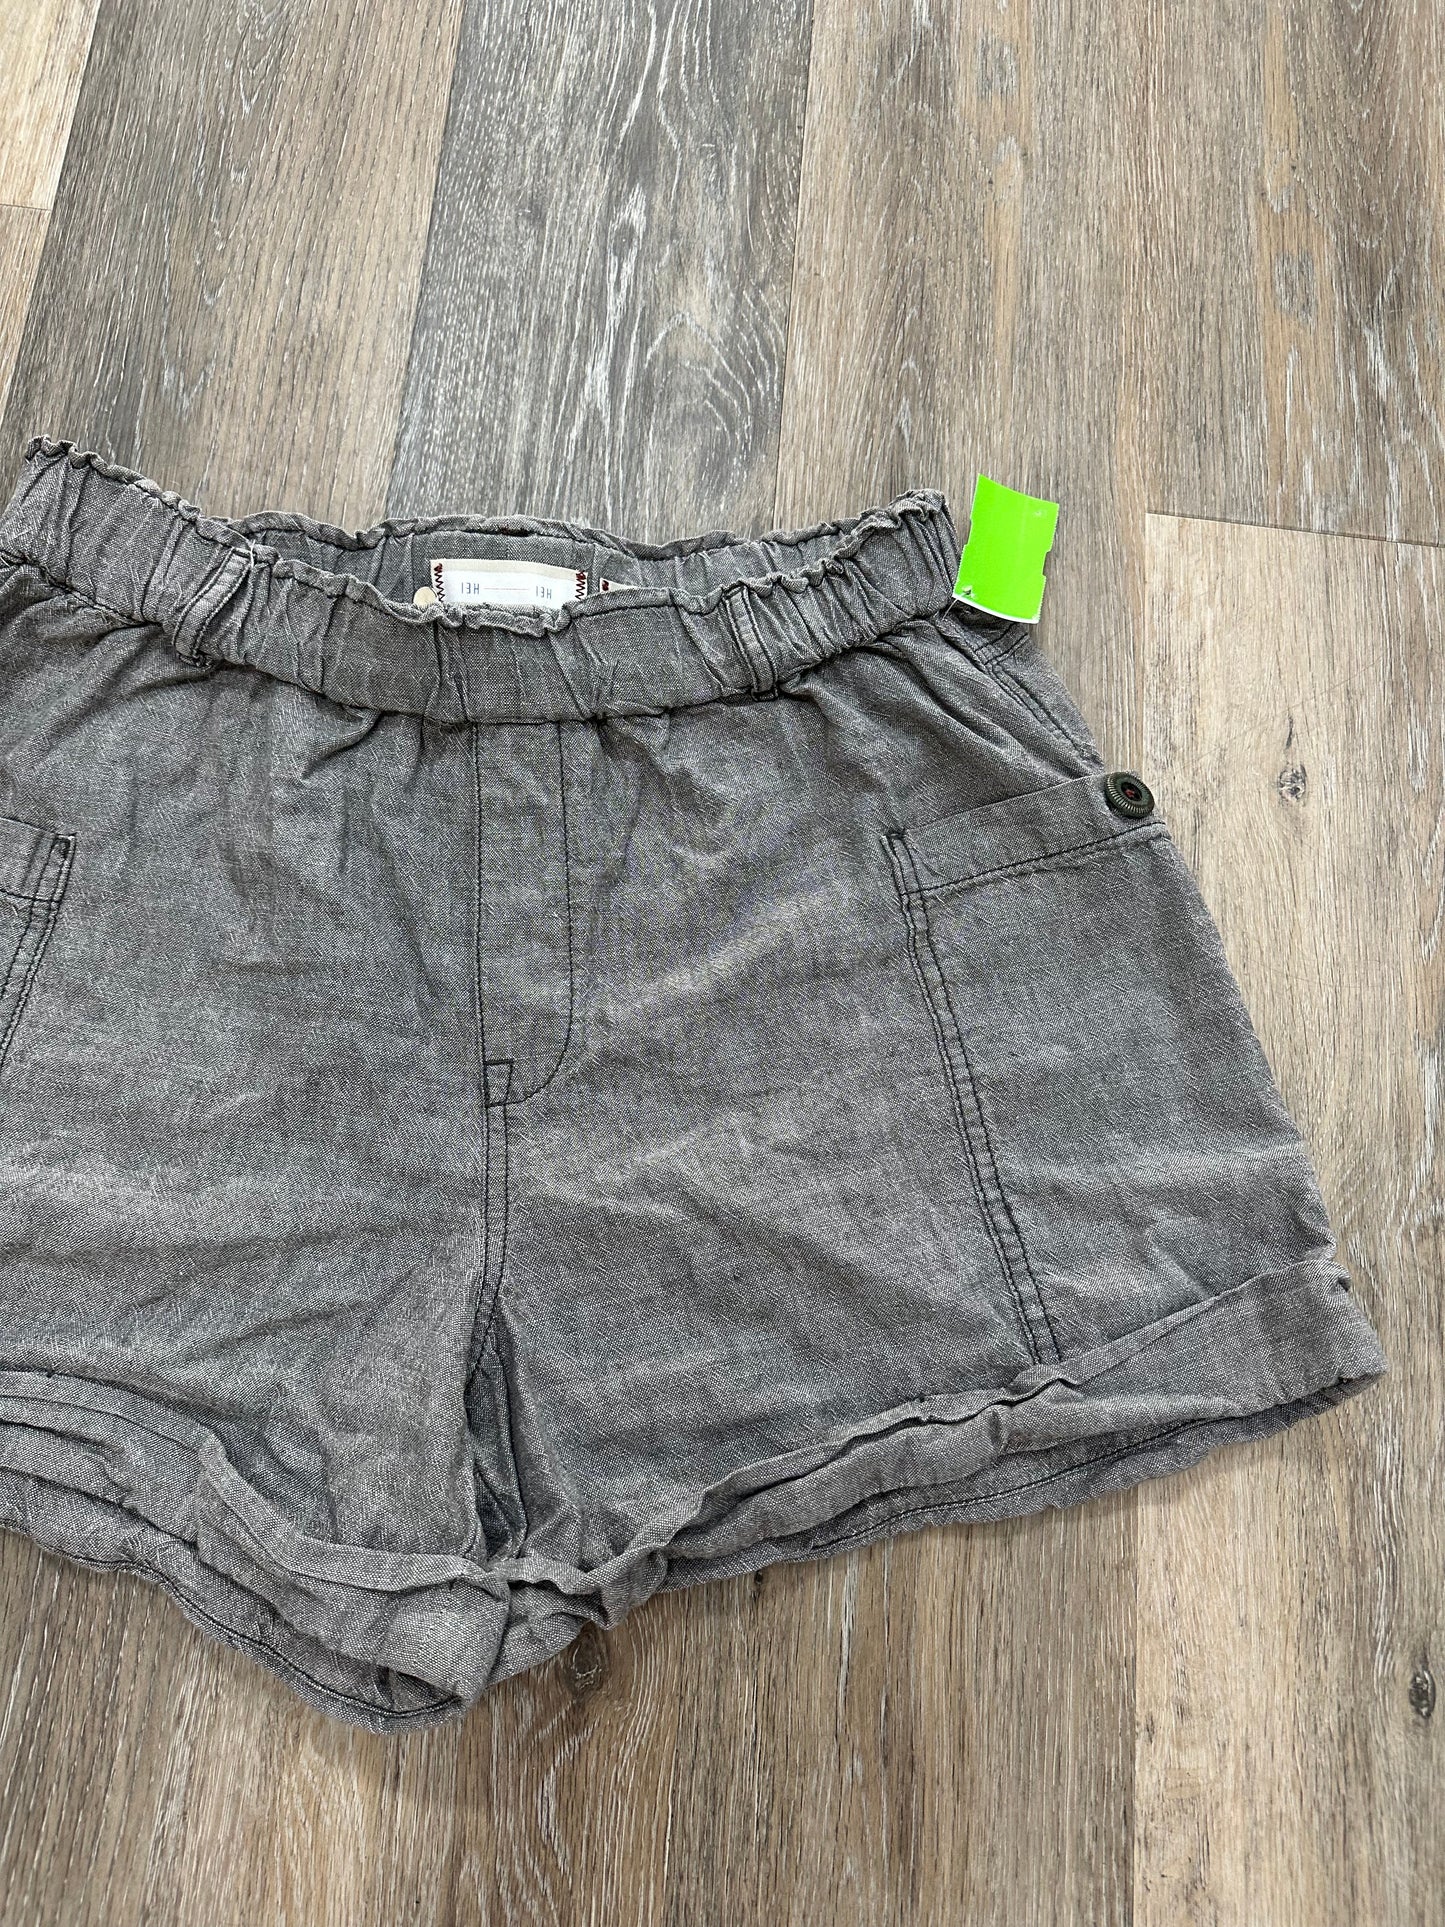 Shorts By Anthropologie  Size: M